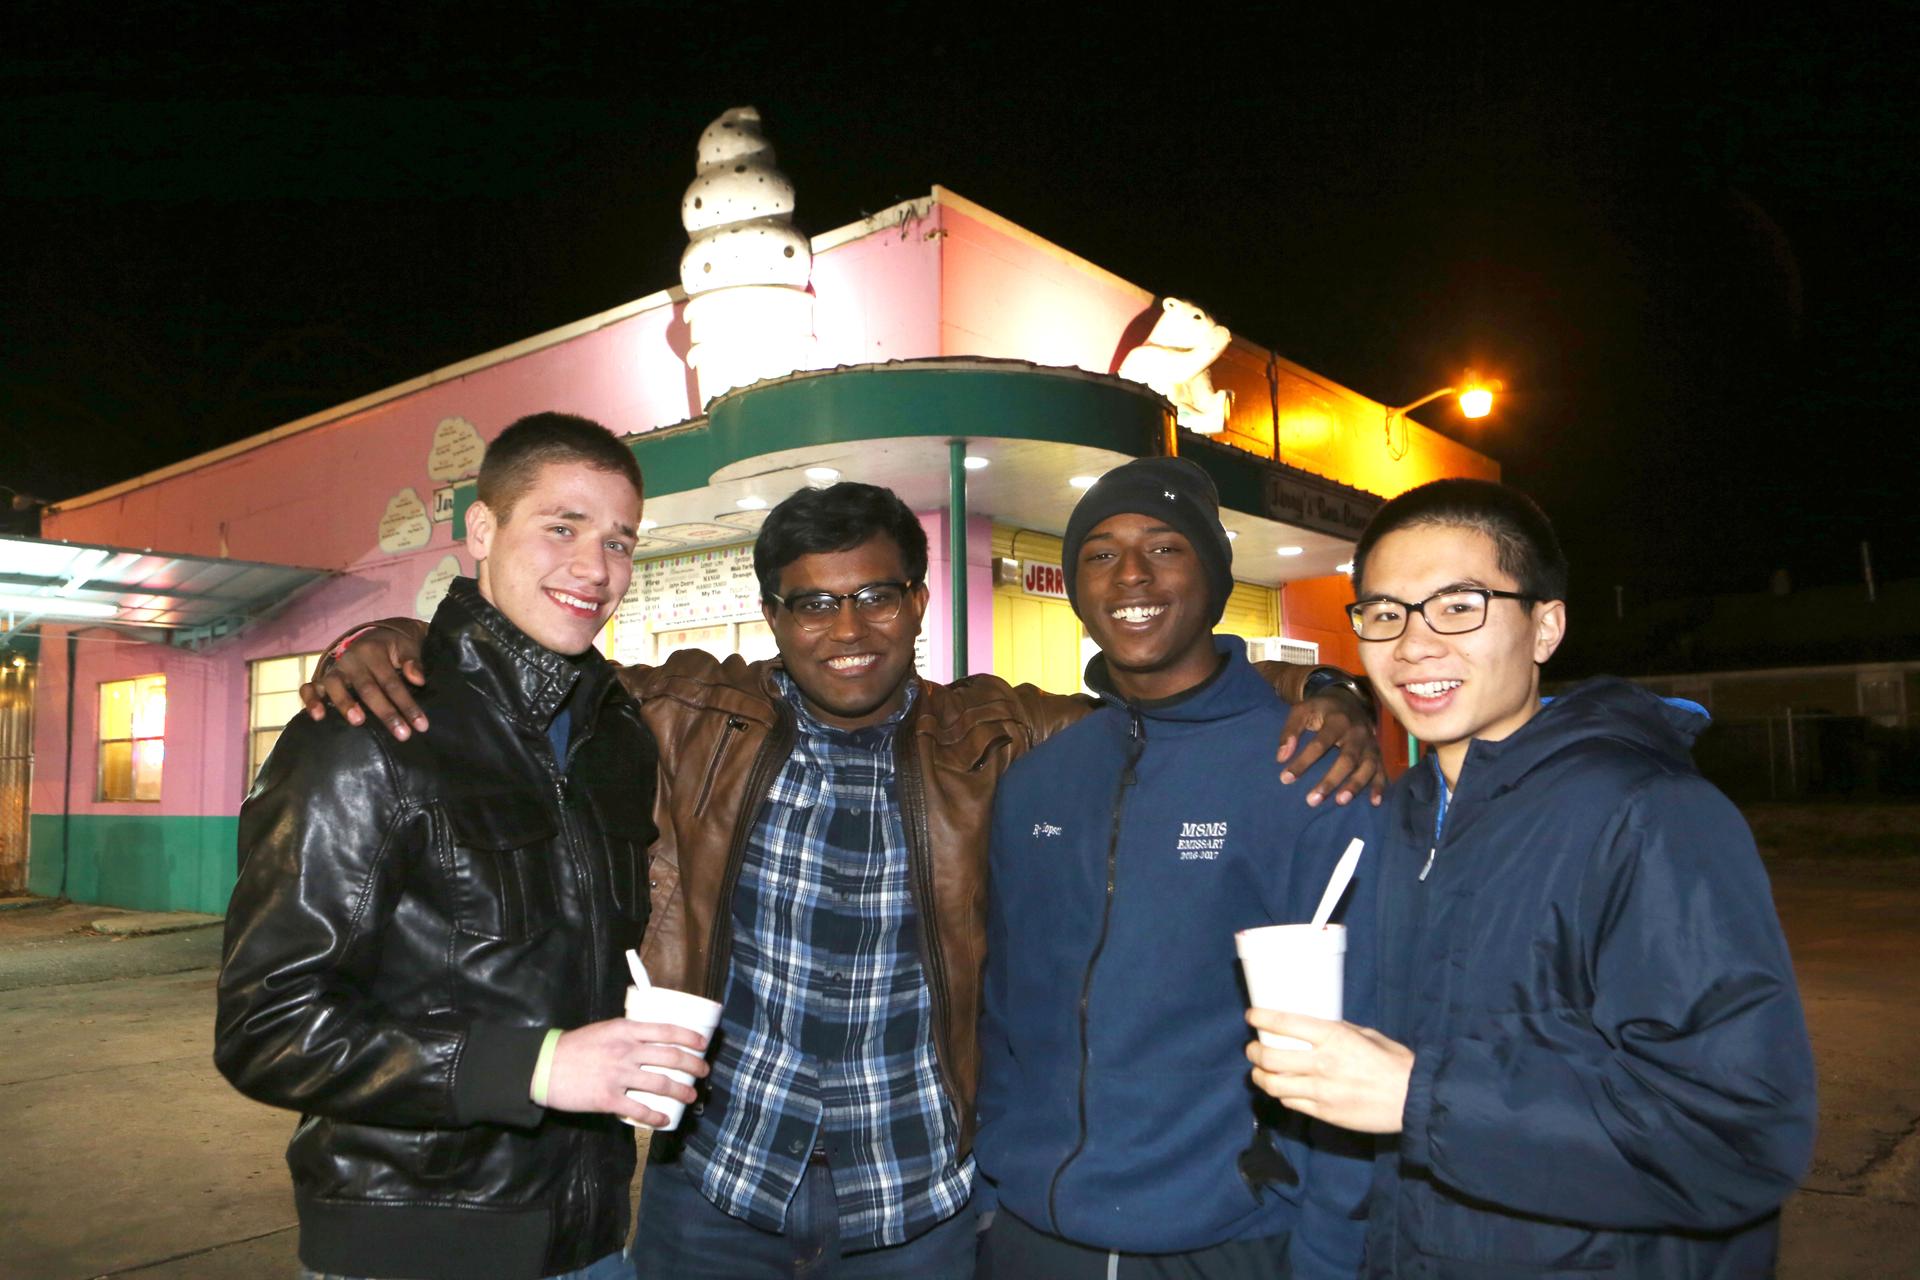 Four young men stand in front of ice cream shop, evening